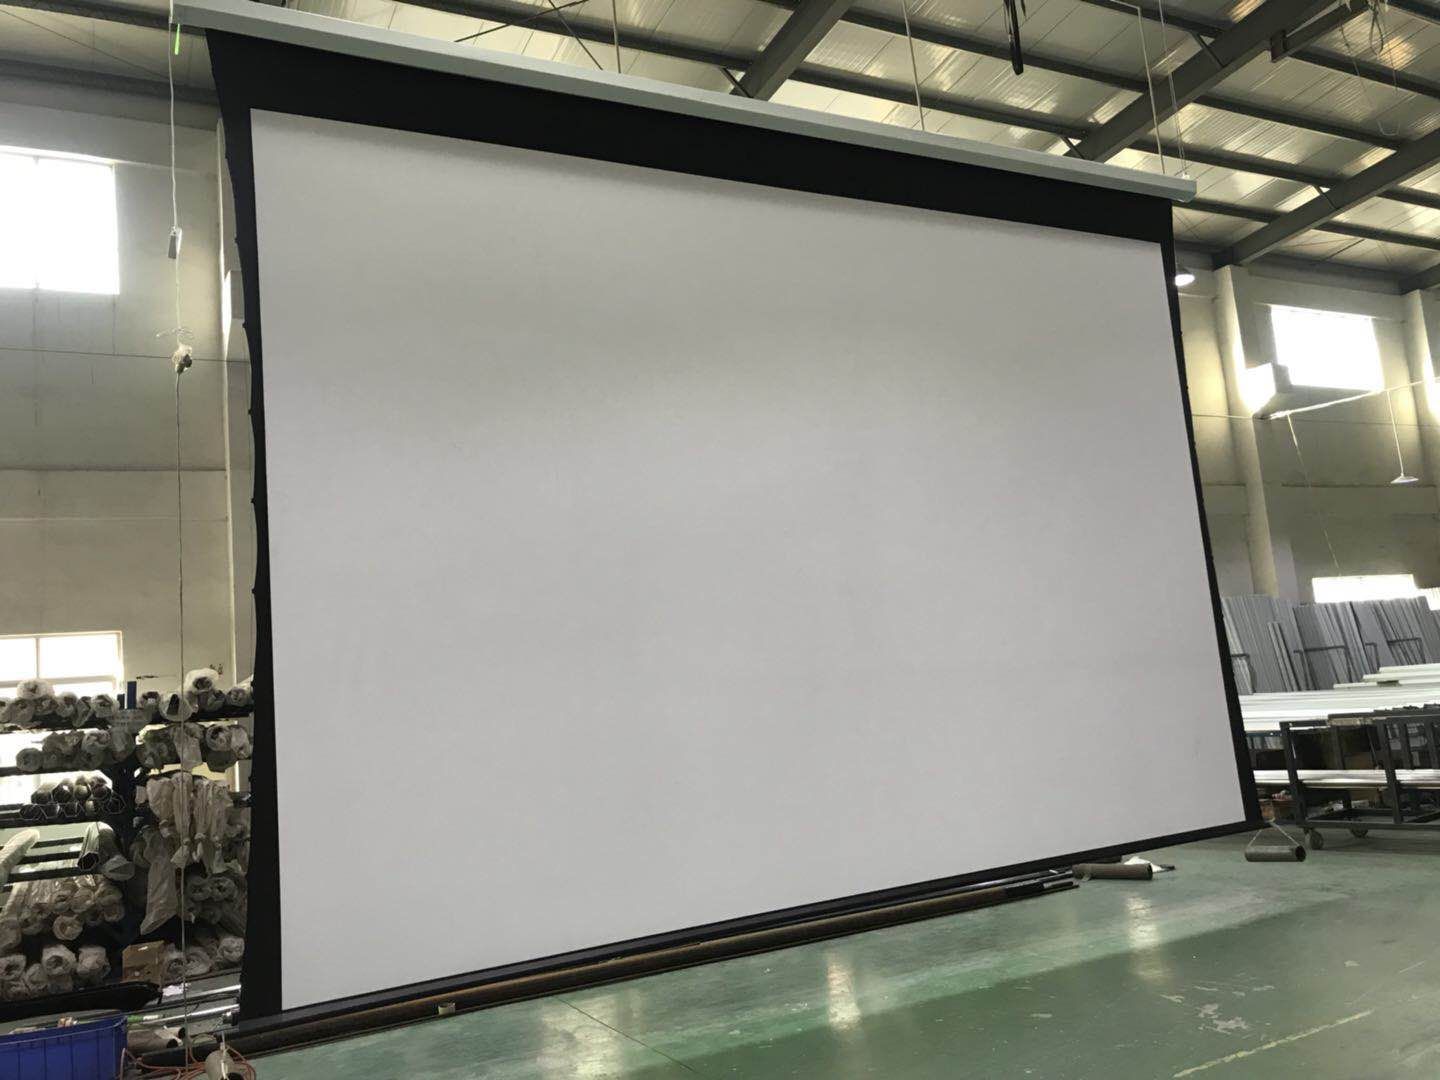 Tab Tension Motorized Projection Screen Electric Projector